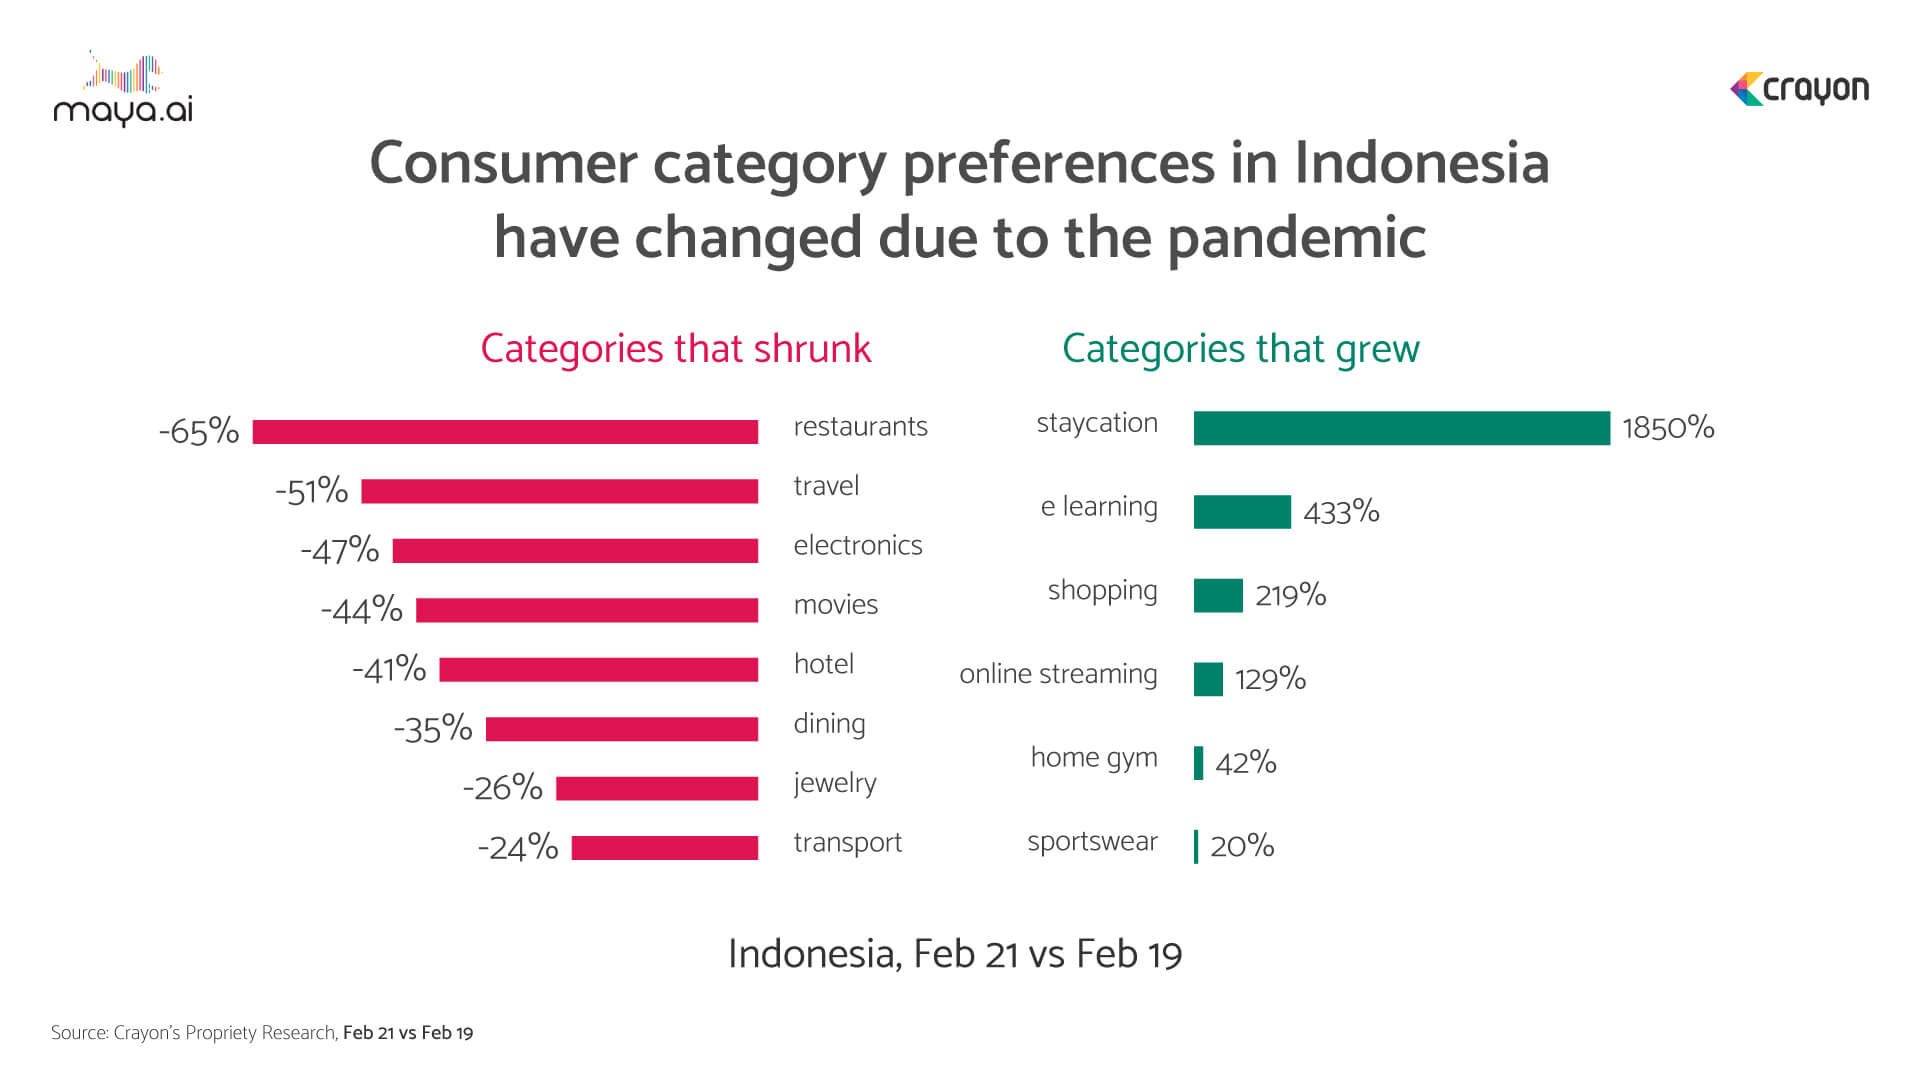 The pandemic has also changed consumer category preferences